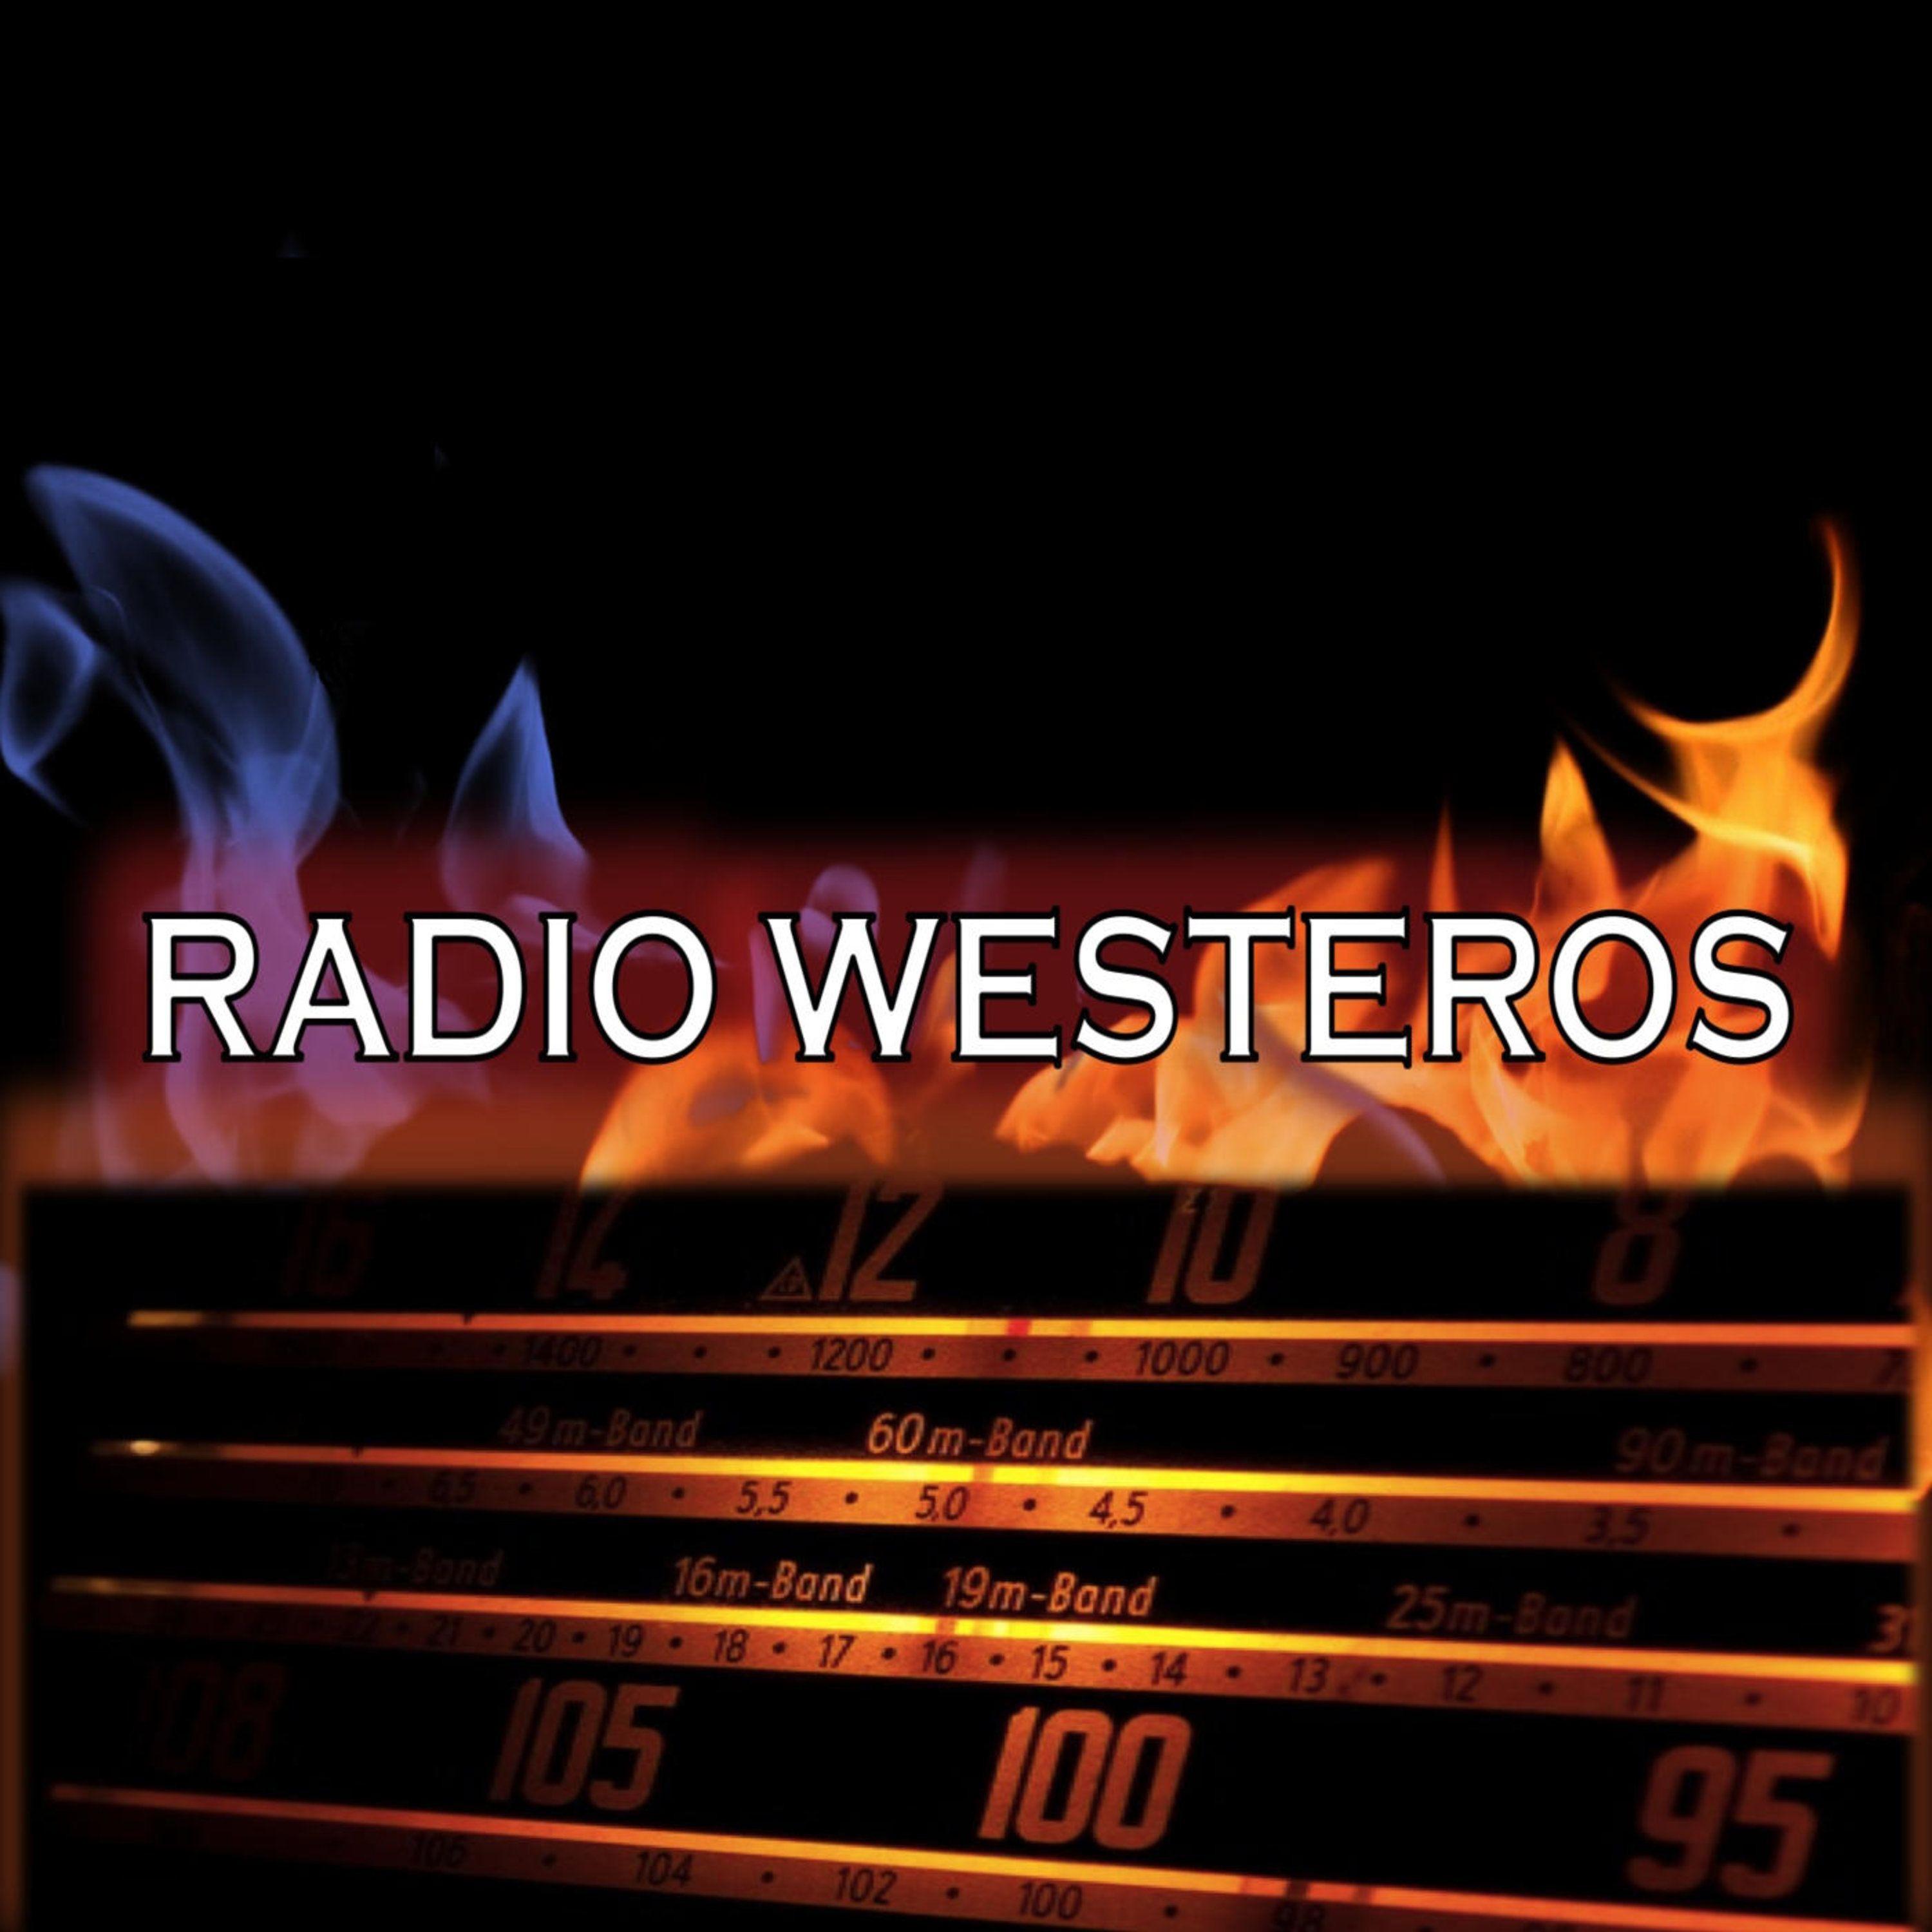 Radio Westeros E35 War of the Five Kings, part 2 - Five Kings